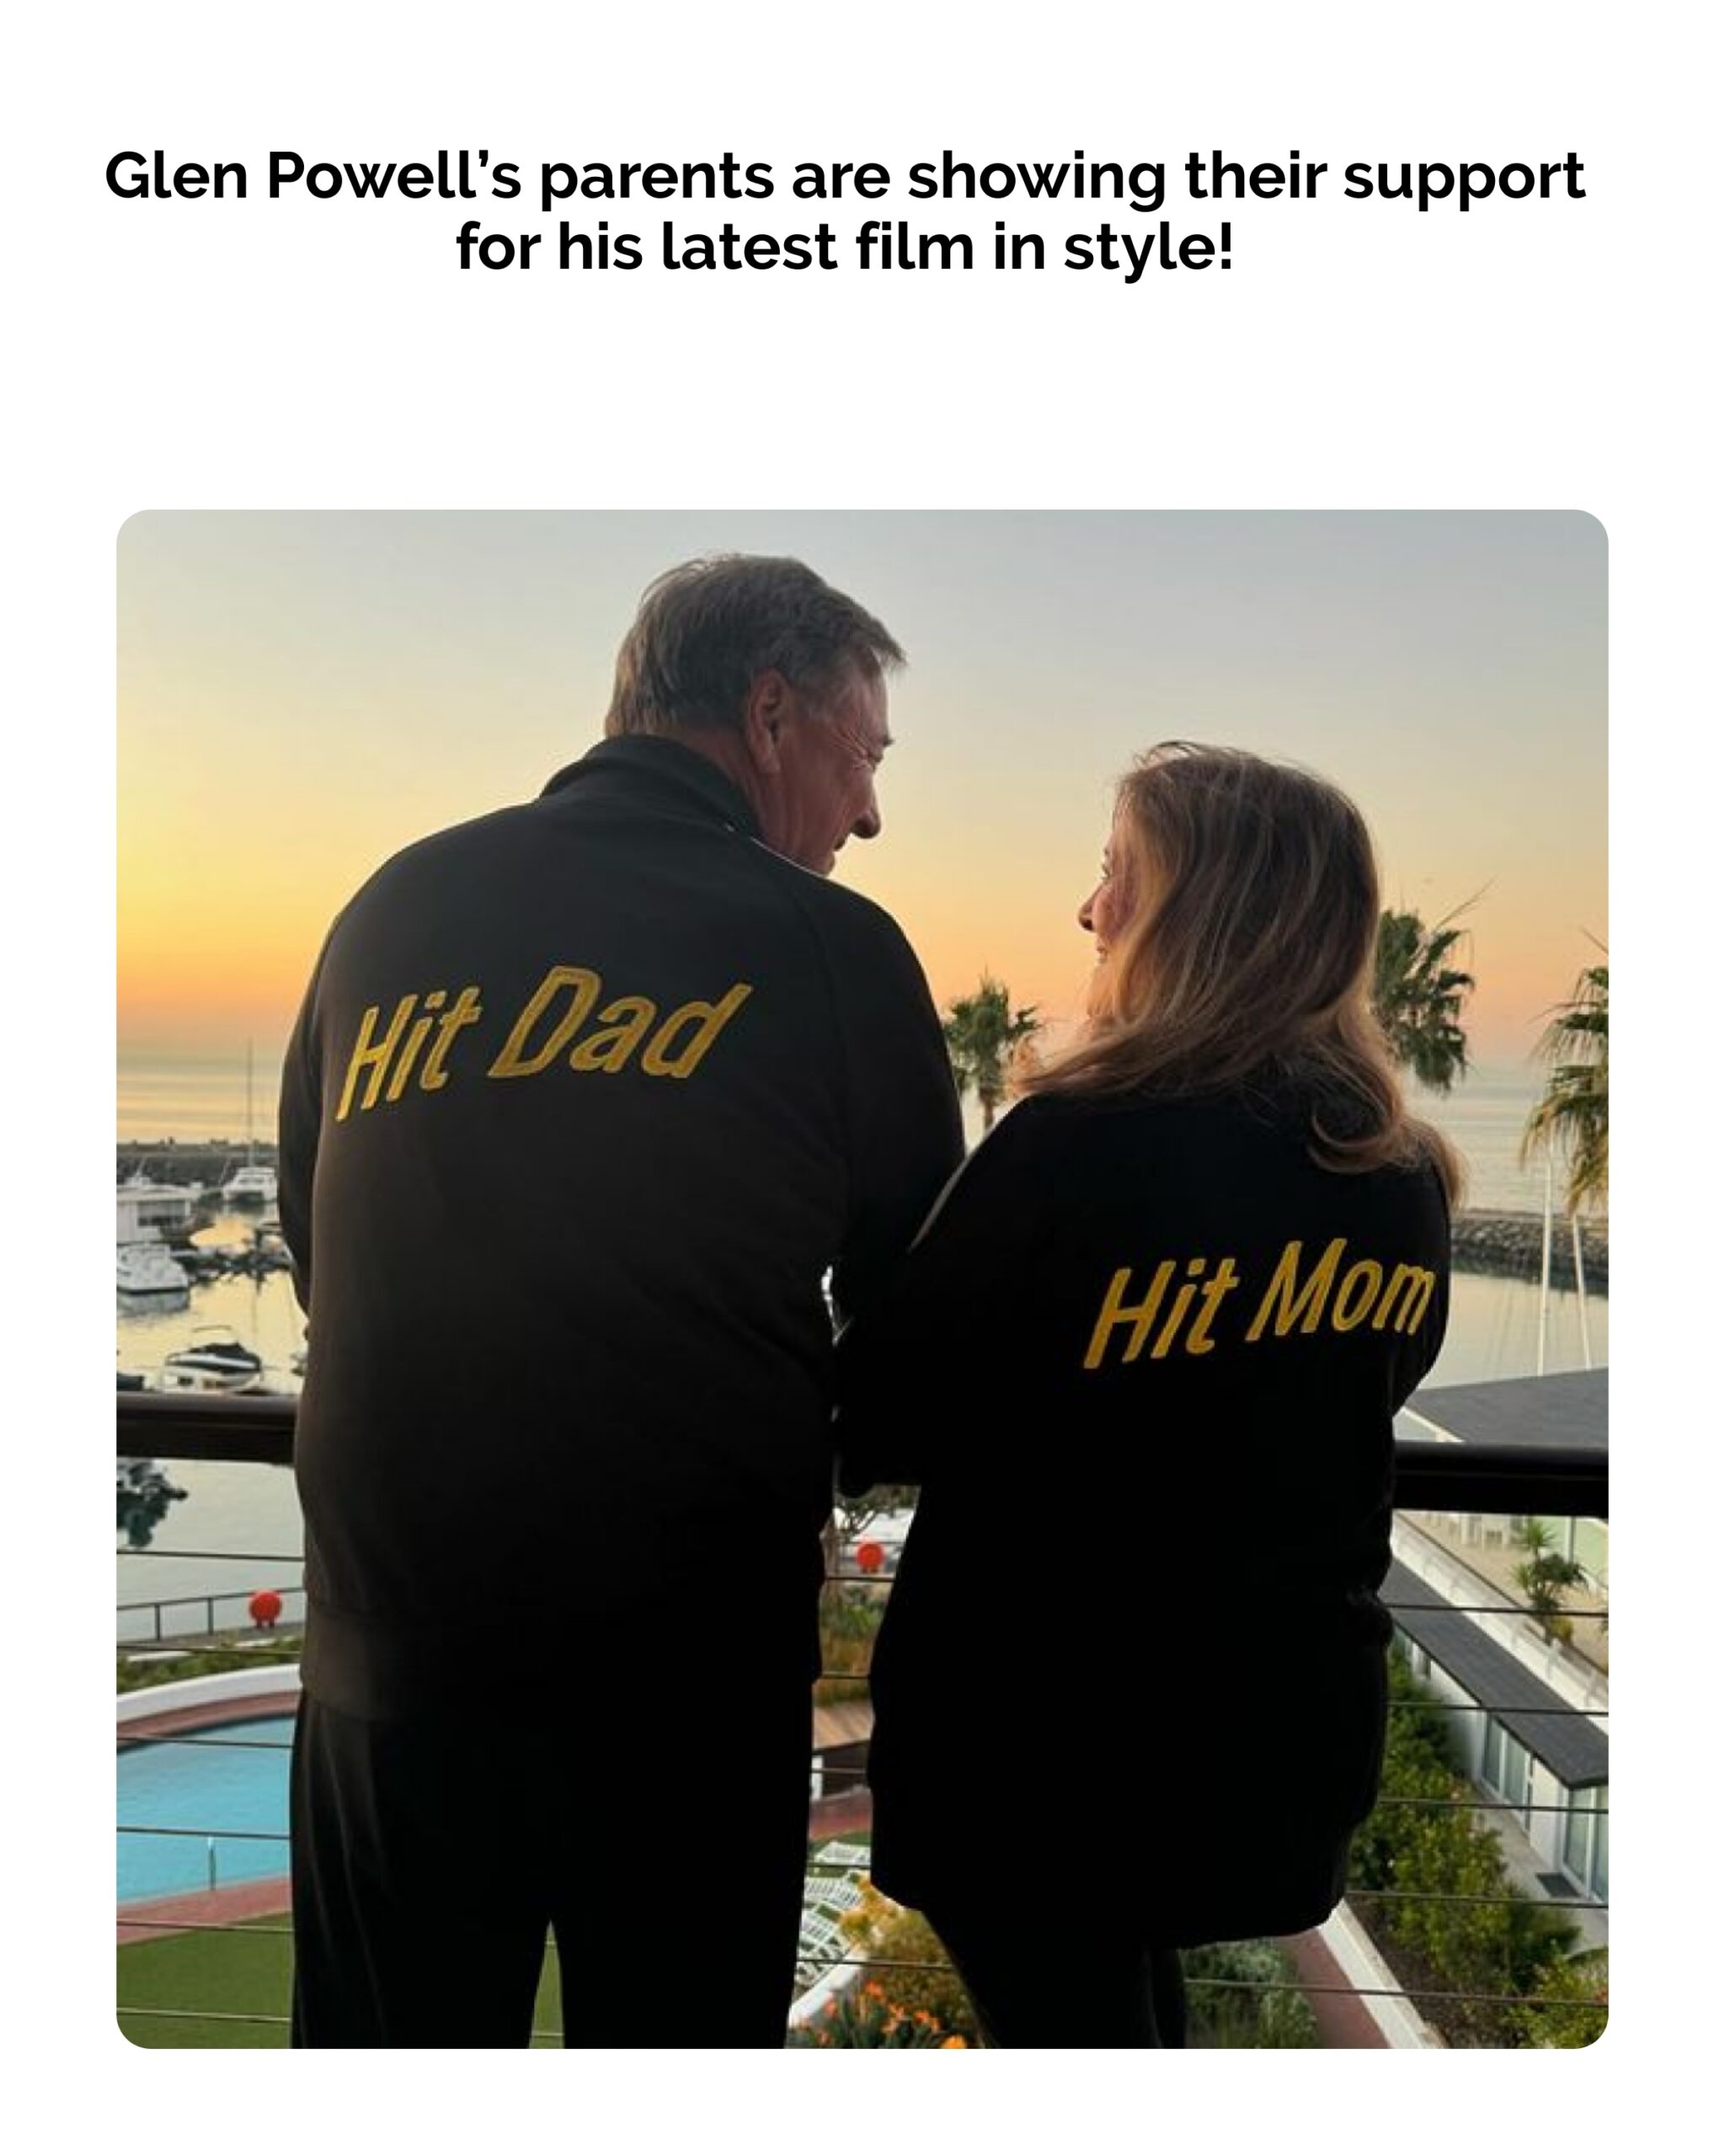 Glen Powell’s Parents Support His Latest Film with ‘Hit Mom’ and ‘Hit Dad’ Jackets — See Their Looks!